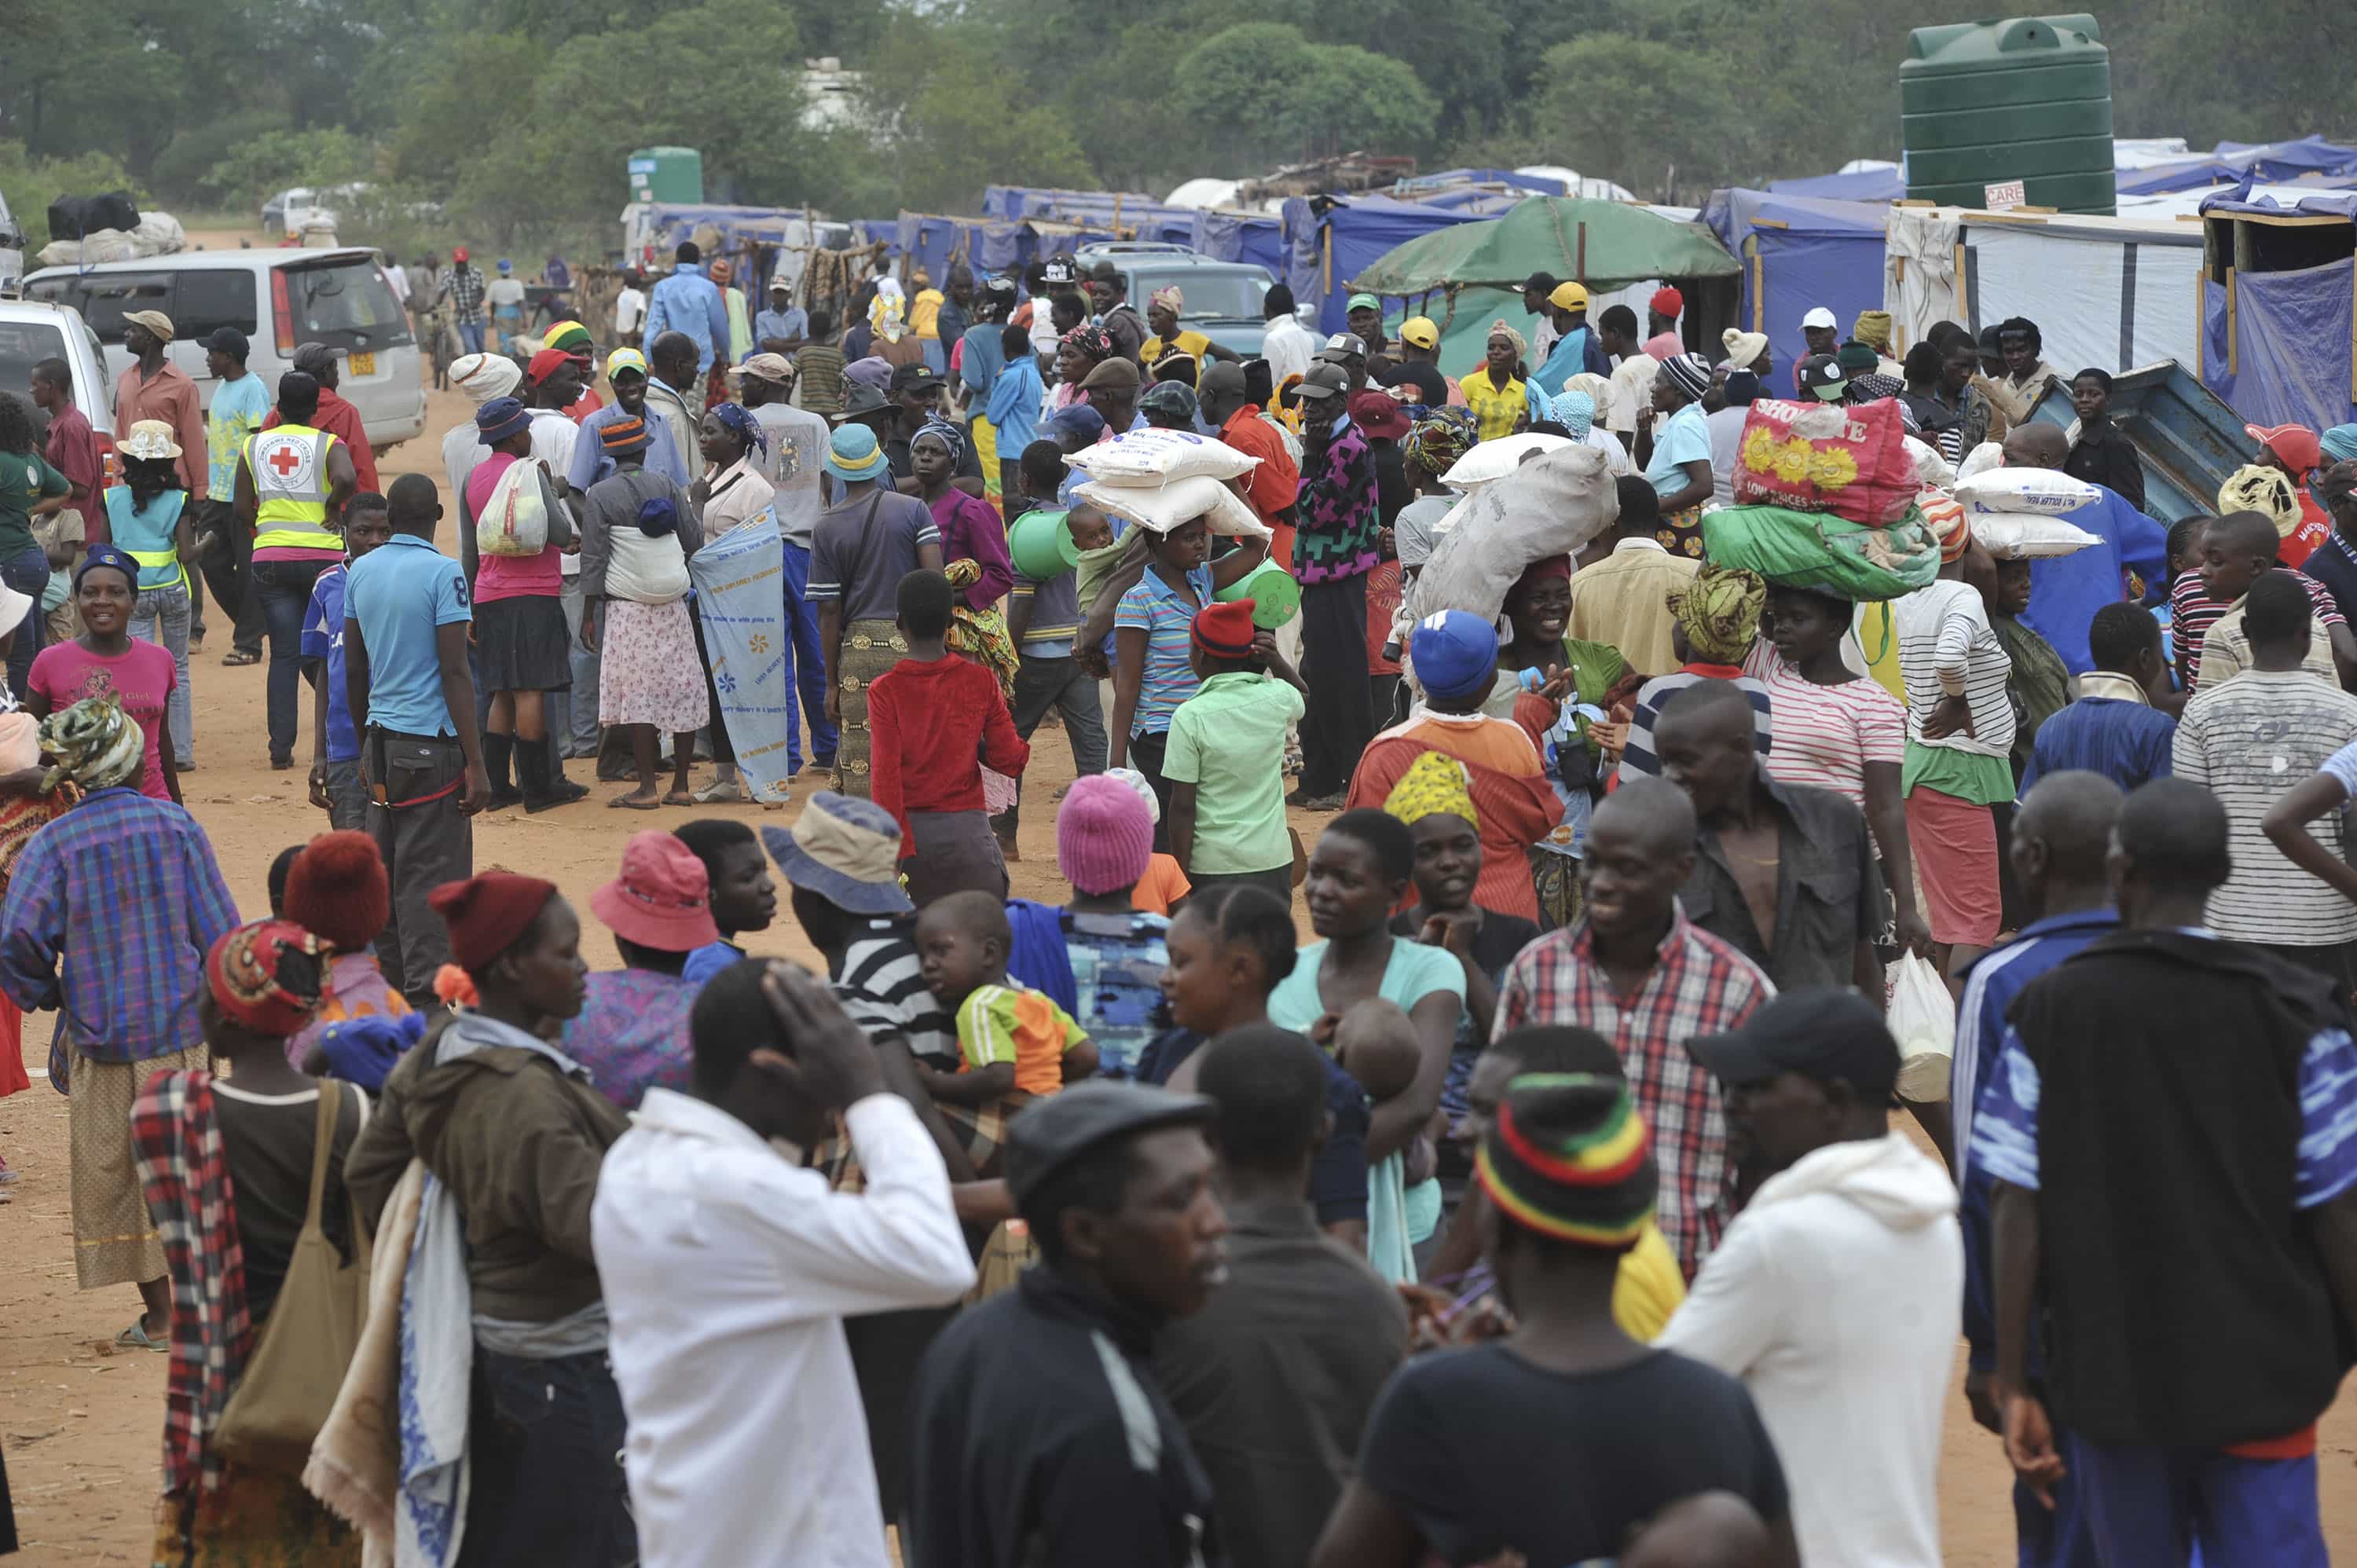 A large number of people at the Chingwizi transit Camp in the province of Masvingo, Zimbabwe can be seen waiting near the centre which distributes food aid to the residents of the camp., Ihsaan Haffejee/Demotix